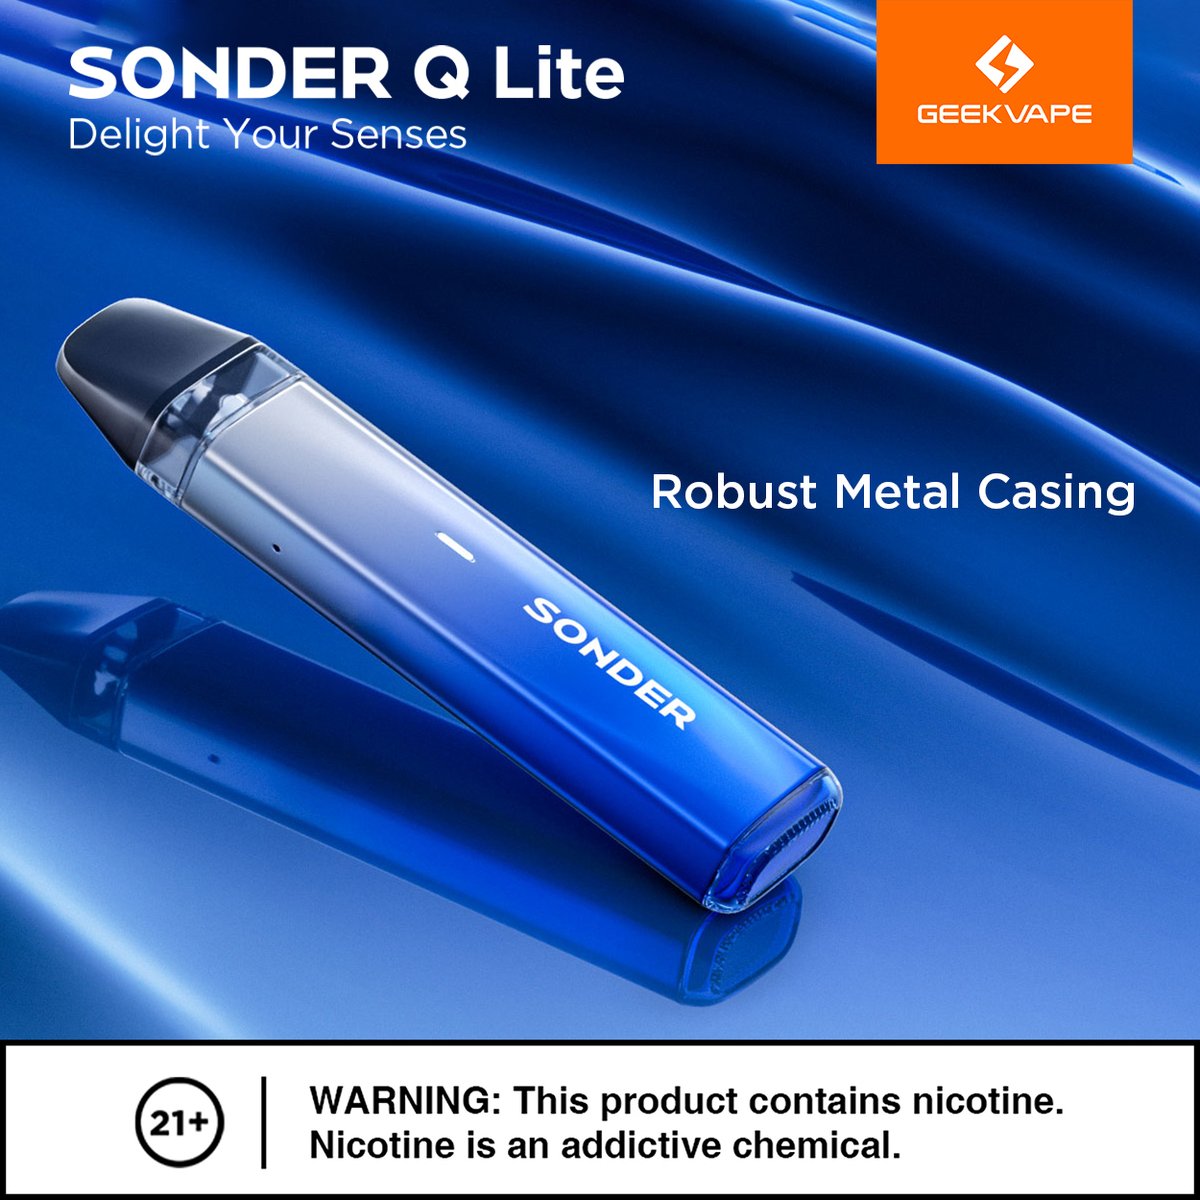 💦Unveiling the Sonder Q Lite! Simple yet refined, its robust metal casing offers unmatched durability and a sleek, comfortable grip. Ready for a smooth, buttonless draw? #SonderQLite #geekvape #ExplosiveLaunch #ecigarette #stopsmokingstartvaping #dampfer #germanvapers